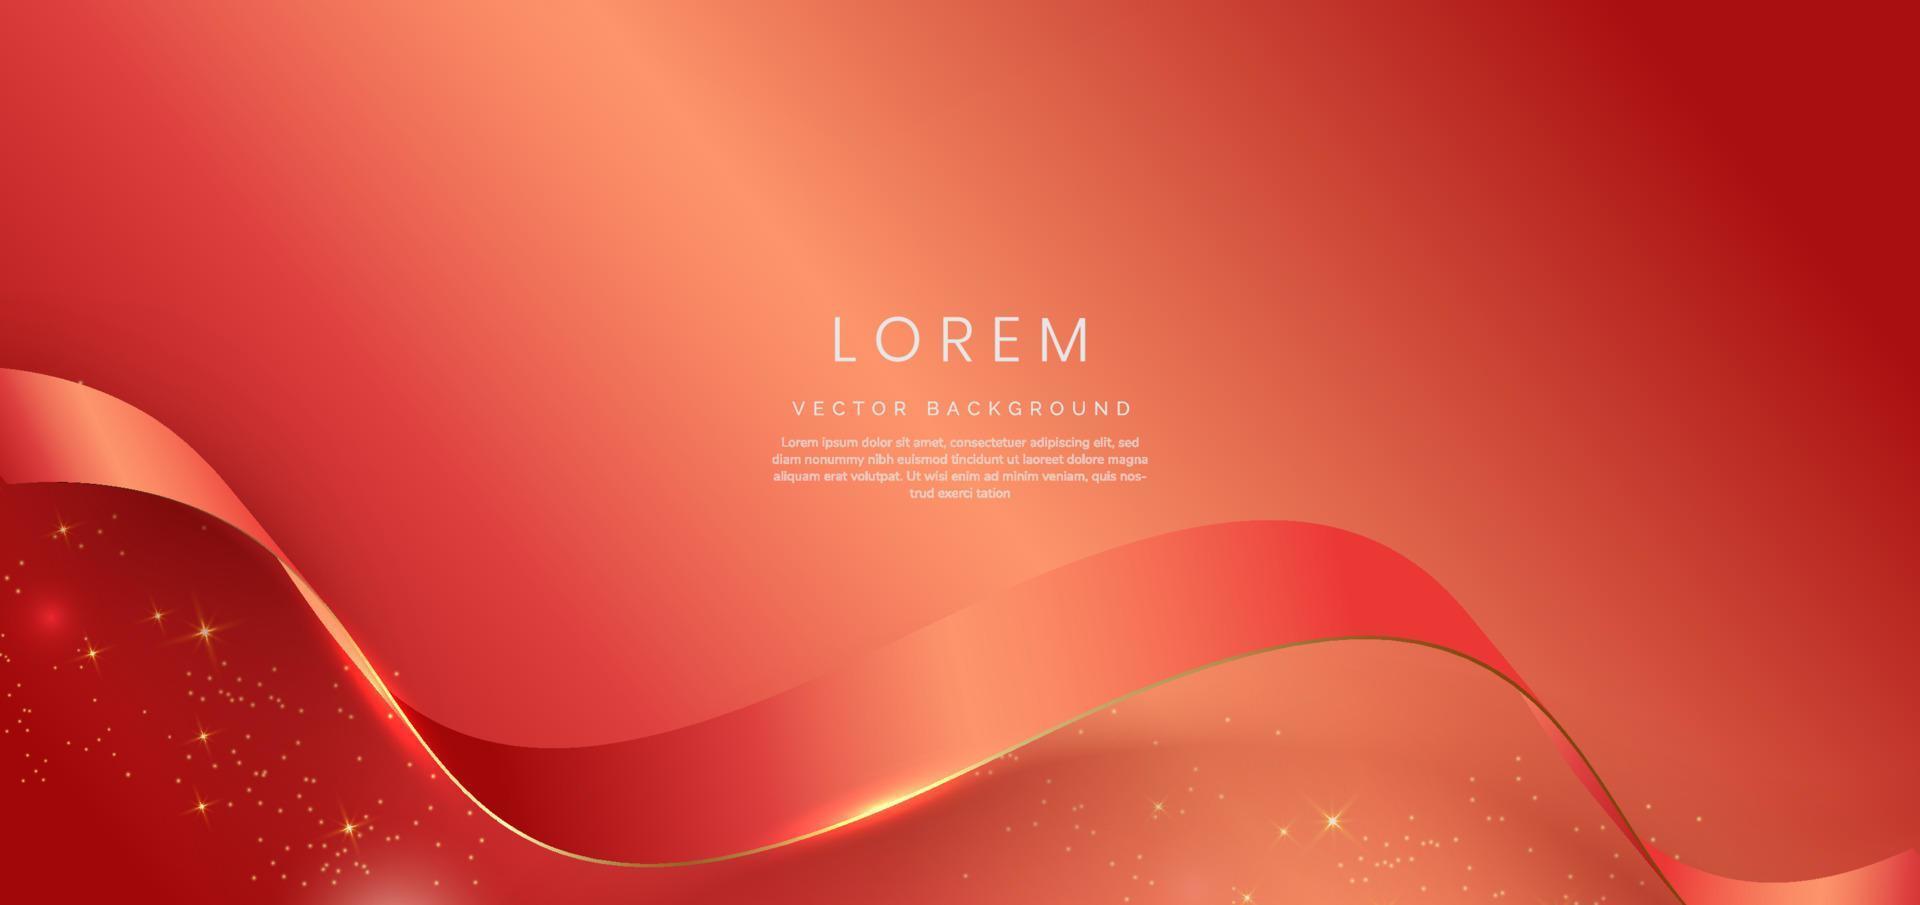 Abstract 3d gold curved red ribbon on red background with bll lighting effect and sparkle with copy space for text. Luxury design style. vector